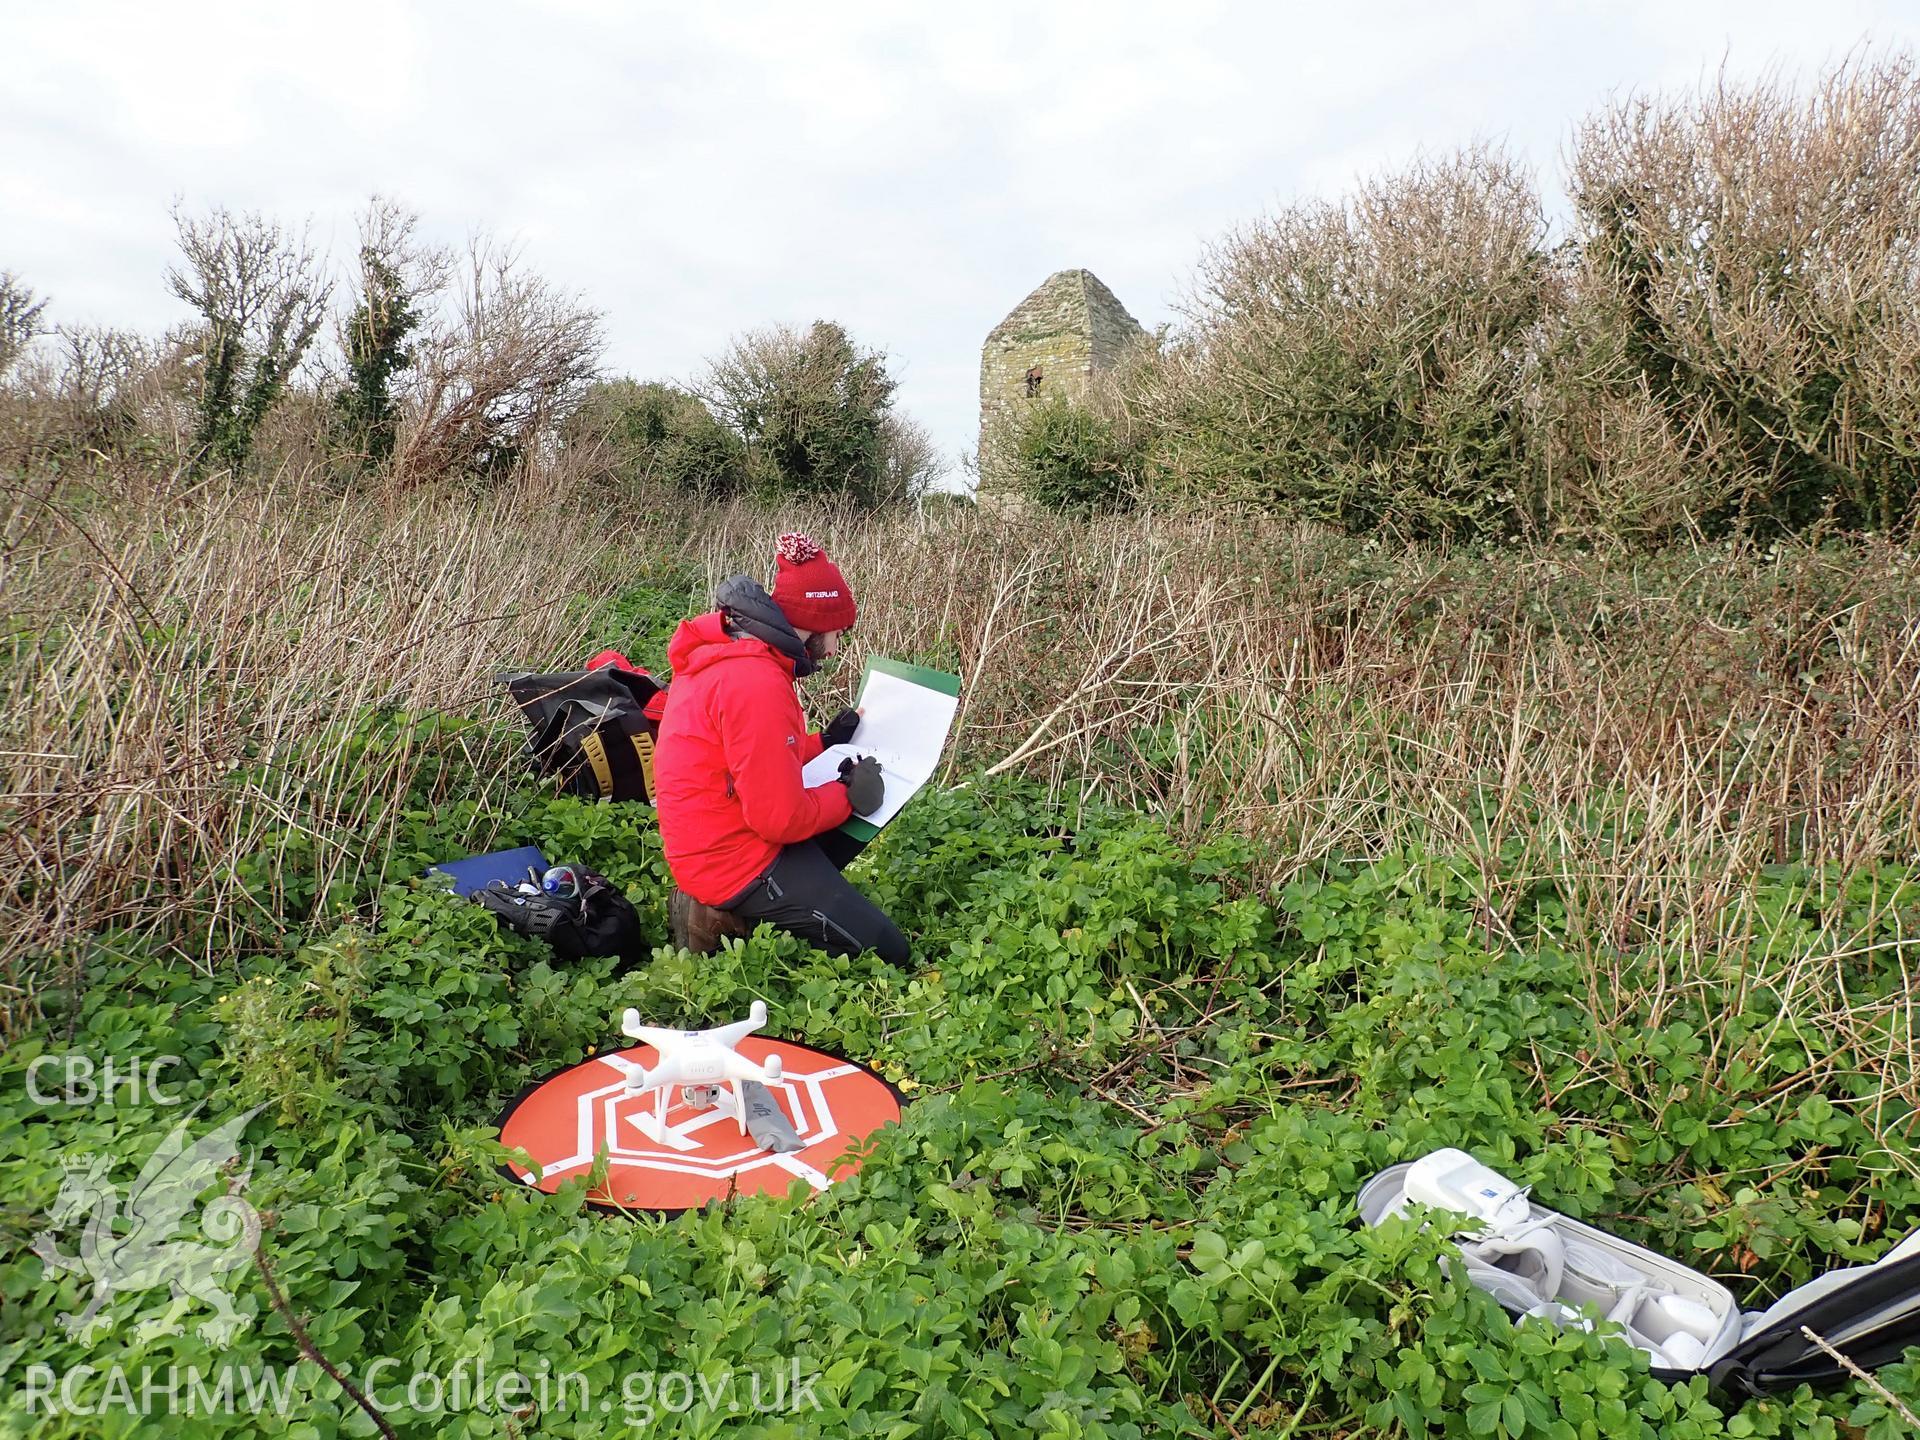 Drone/UAV survey in progress by Dan Hunt on the church on Puffin Island or Ynys Seiriol, 26 November 2018 for the CHERISH Project. ? Crown: CHERISH PROJECT 2018. Produced with EU funds through the Ireland Wales Co-operation Programme 2014-2020. All material made freely available through the Open Government Licence.